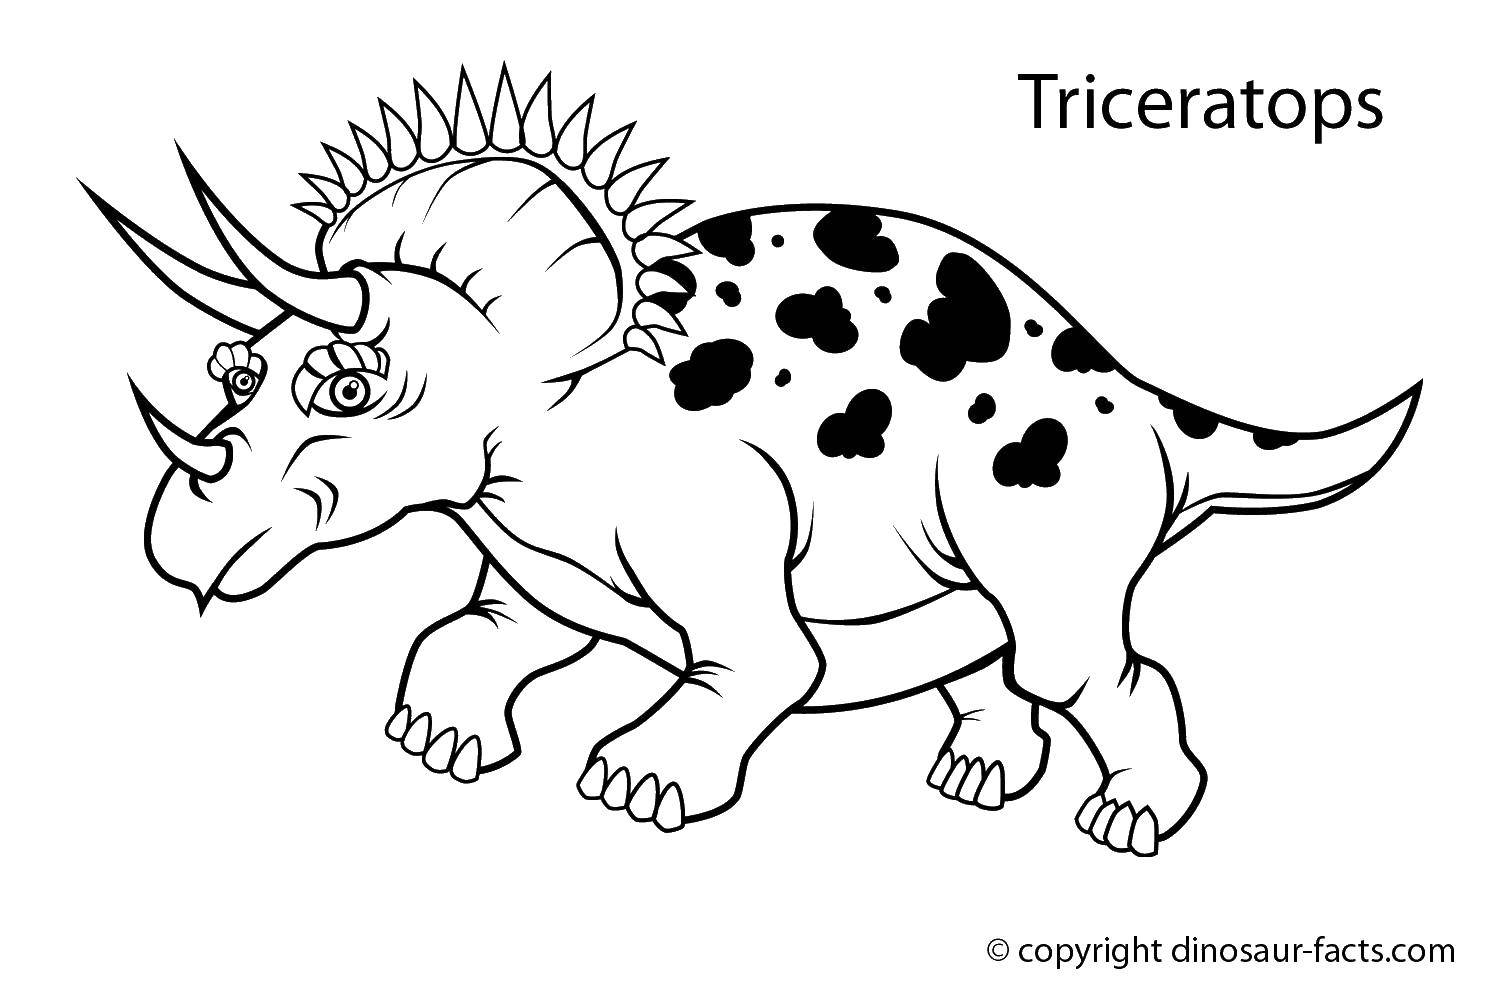 Coloring Triceratops. Category Jurassic Park. Tags:  dinosaurs, Triceratops.